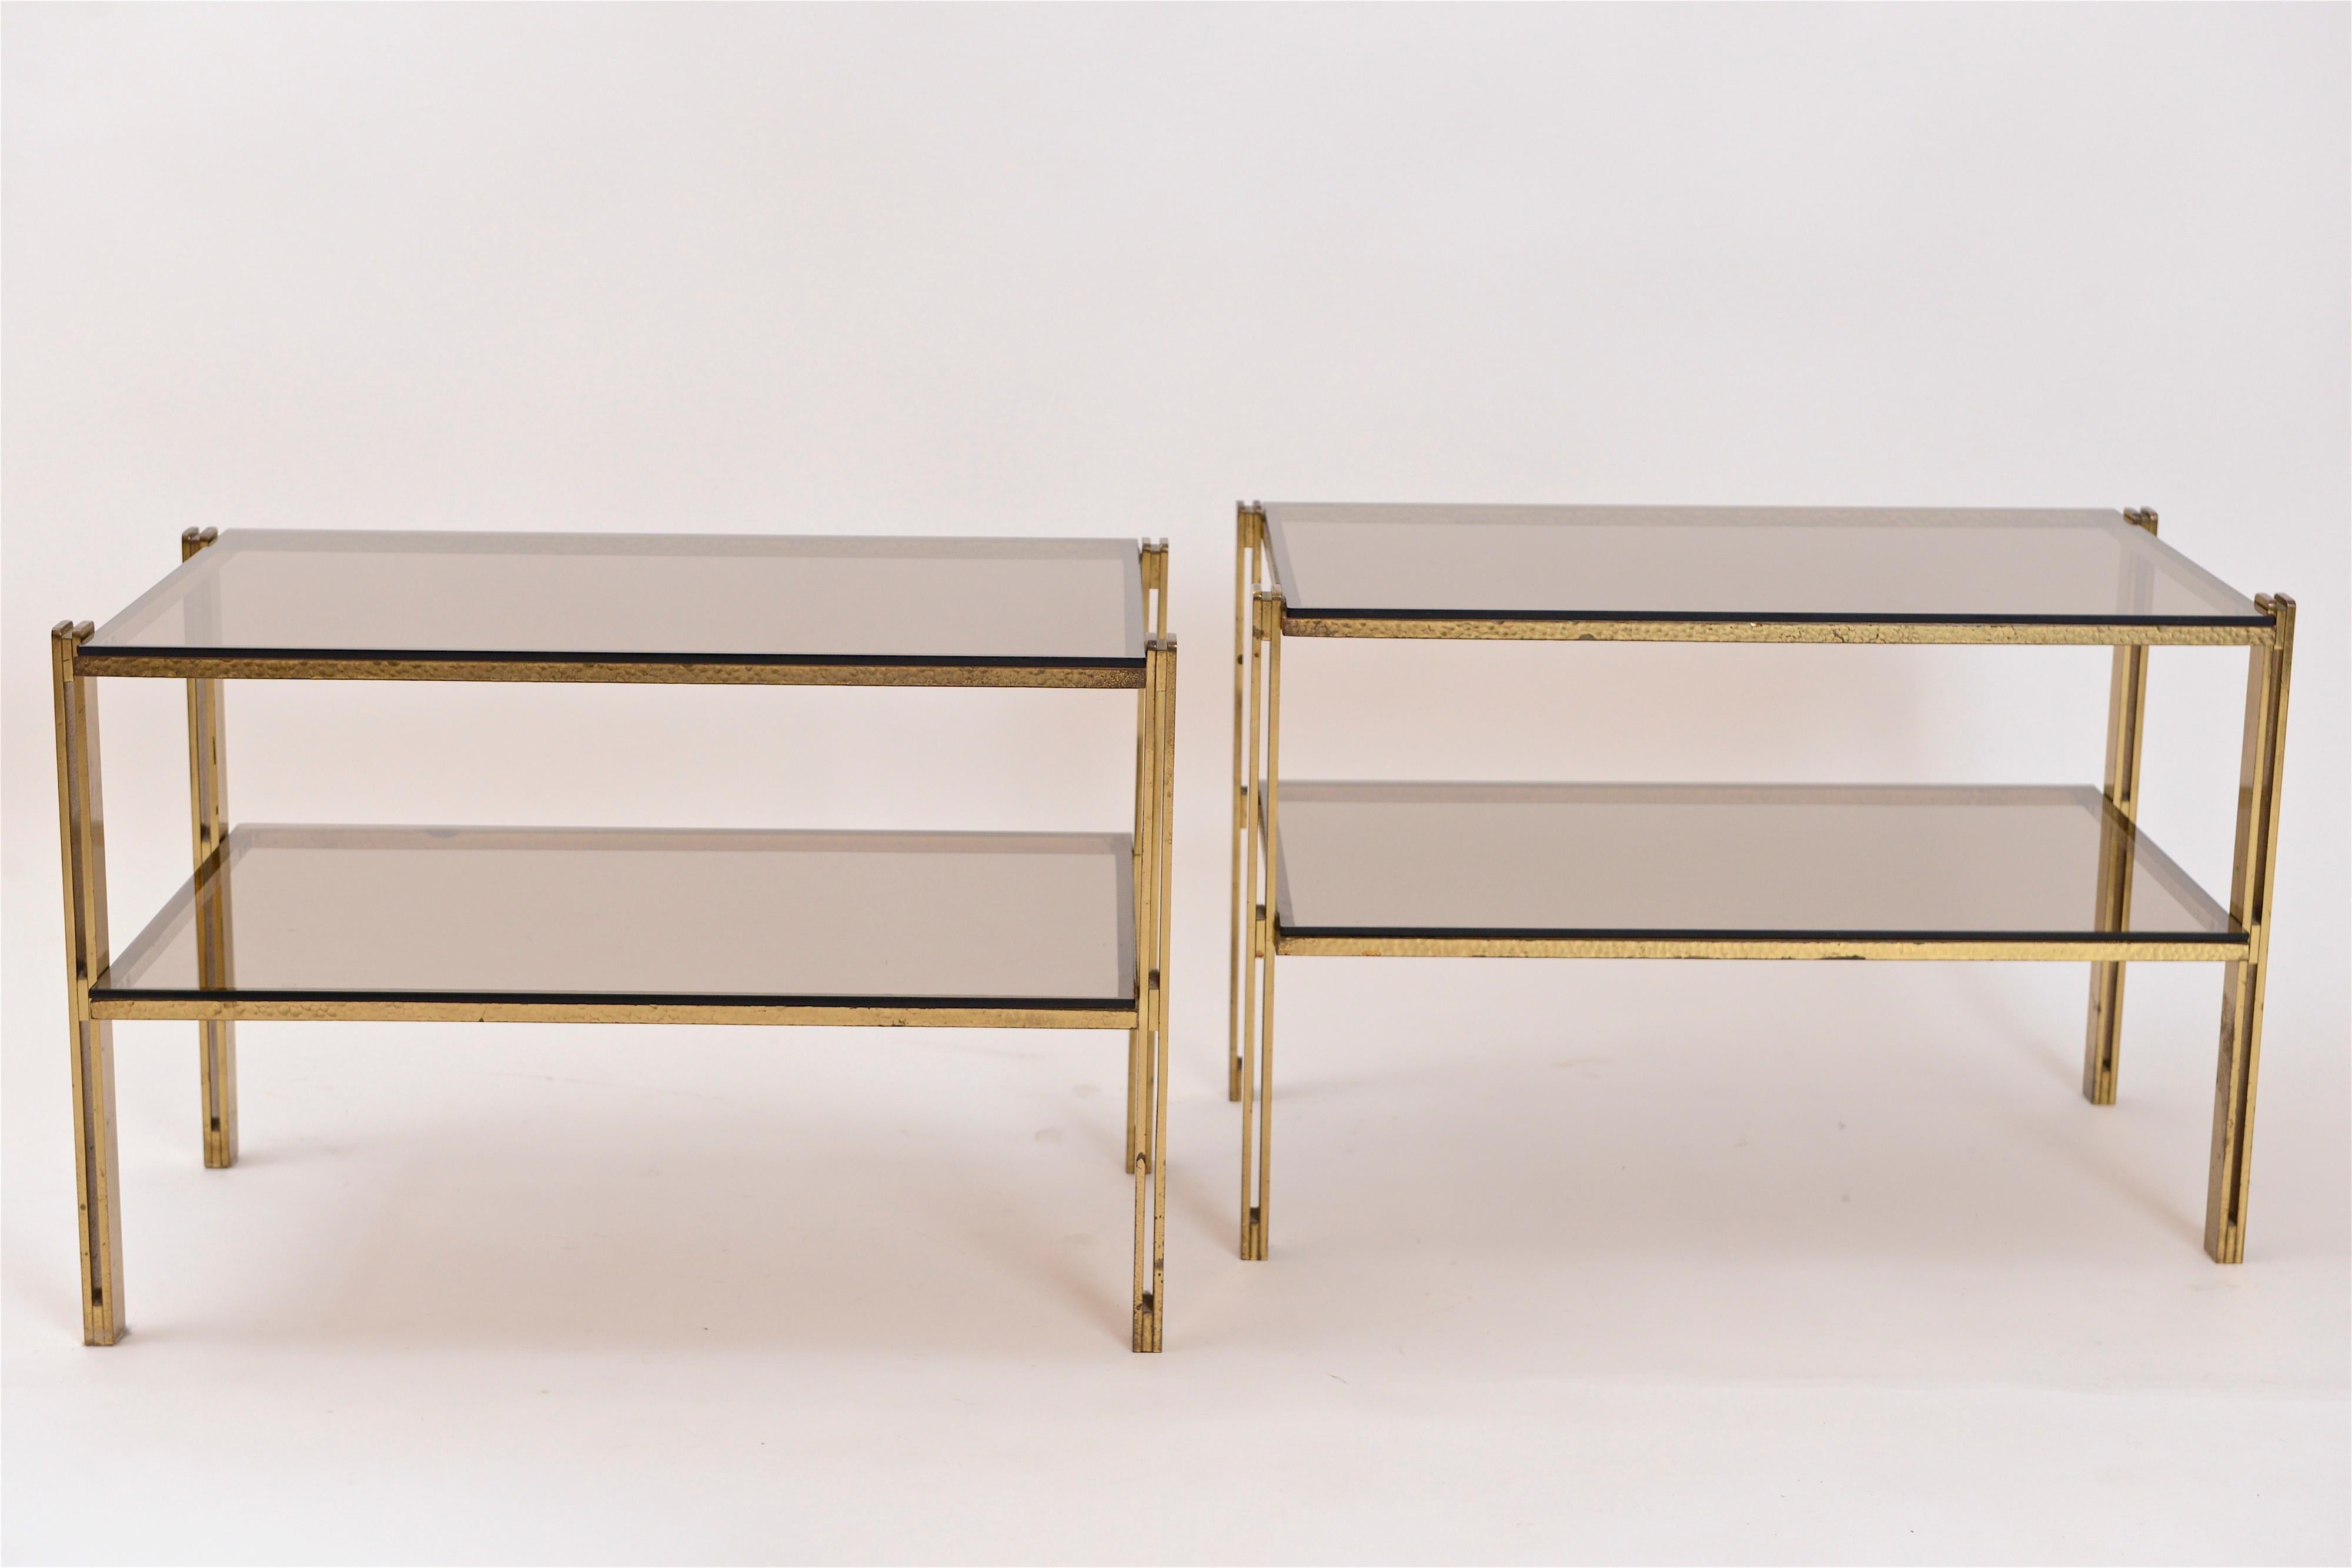 A fantastic pair of brass and fumé glass side tables attributed to Osvaldo Borsani. These two-tiered tables are constructed of the highest quality materials…solid hammered brass and original fumé glass inserts.